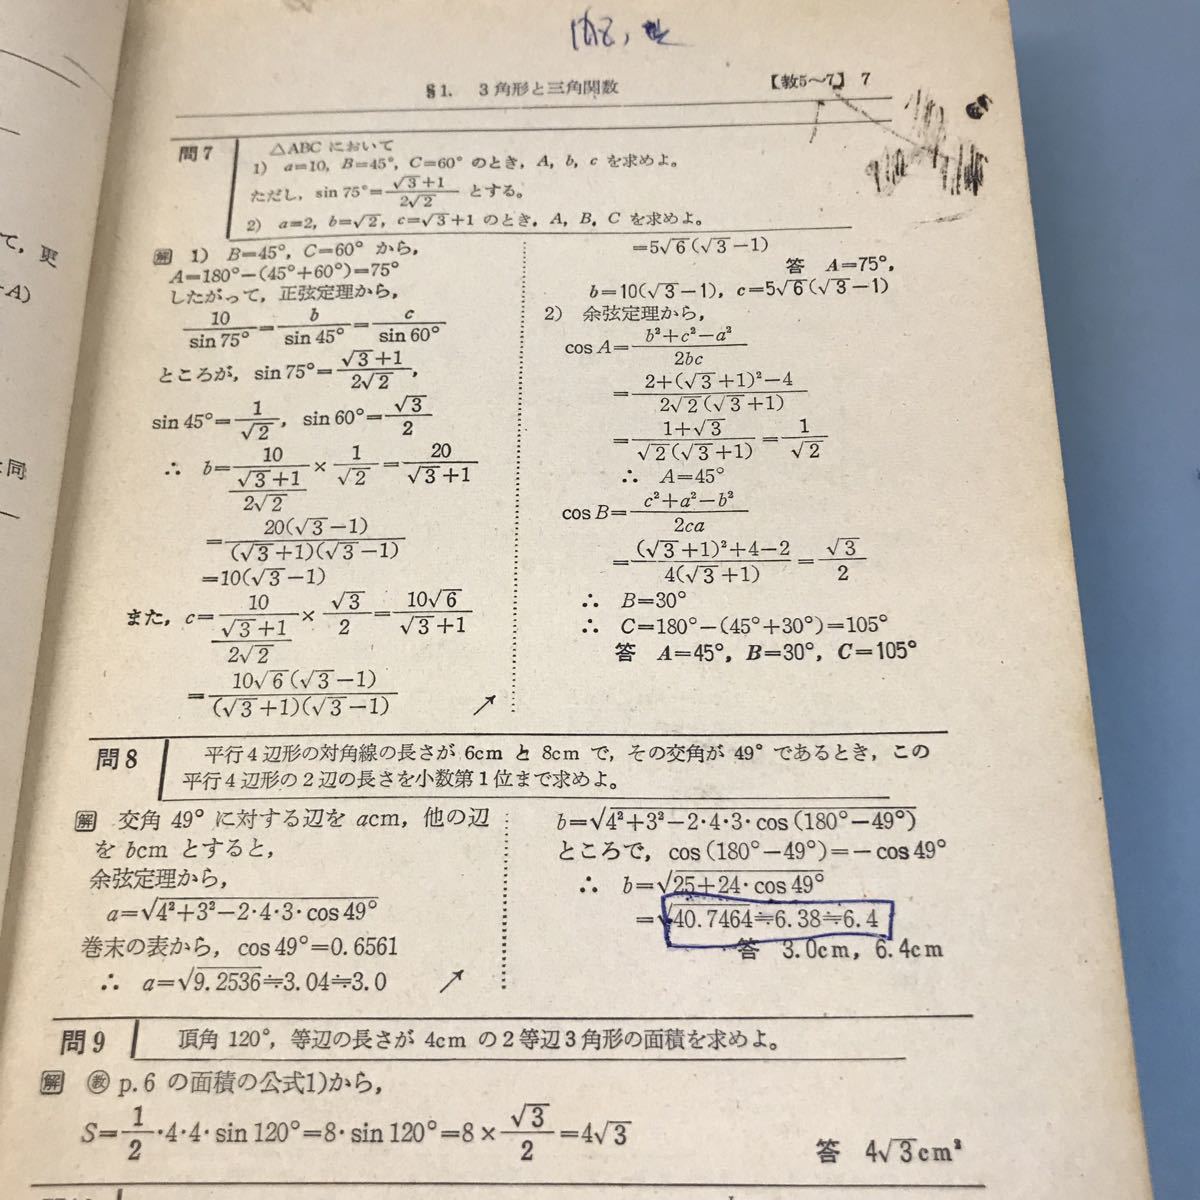 A56-112 textbook radar high school mathematics ⅡB real . publish version basis writing . paper . writing great number equipped crack equipped.